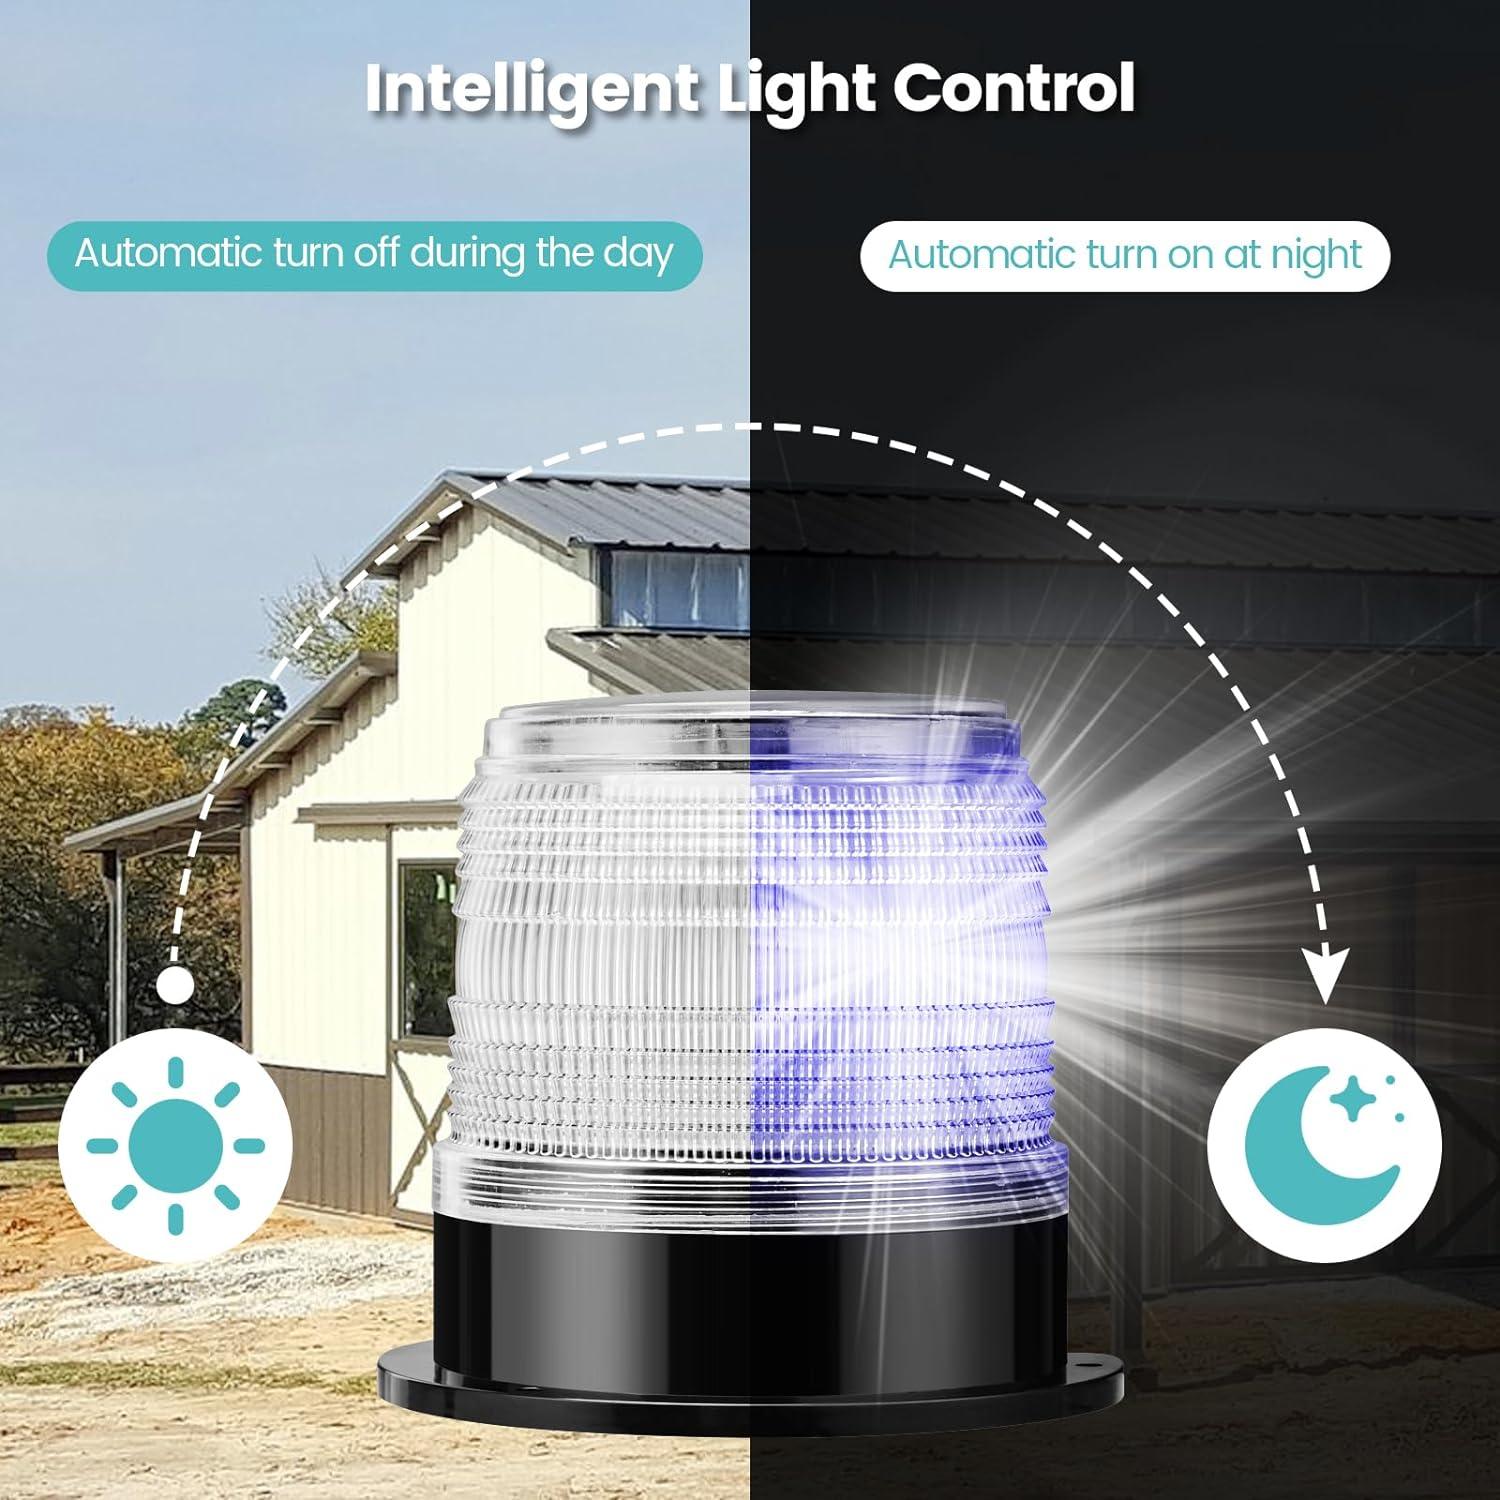 Night Predator Deterrent, Briidea Solar Predator Control Light with Batteries, 360° Highlighting LED Bright to 1.6KM Away, Automatic Turn On at Night, Protect Crops and Poultry - briidea